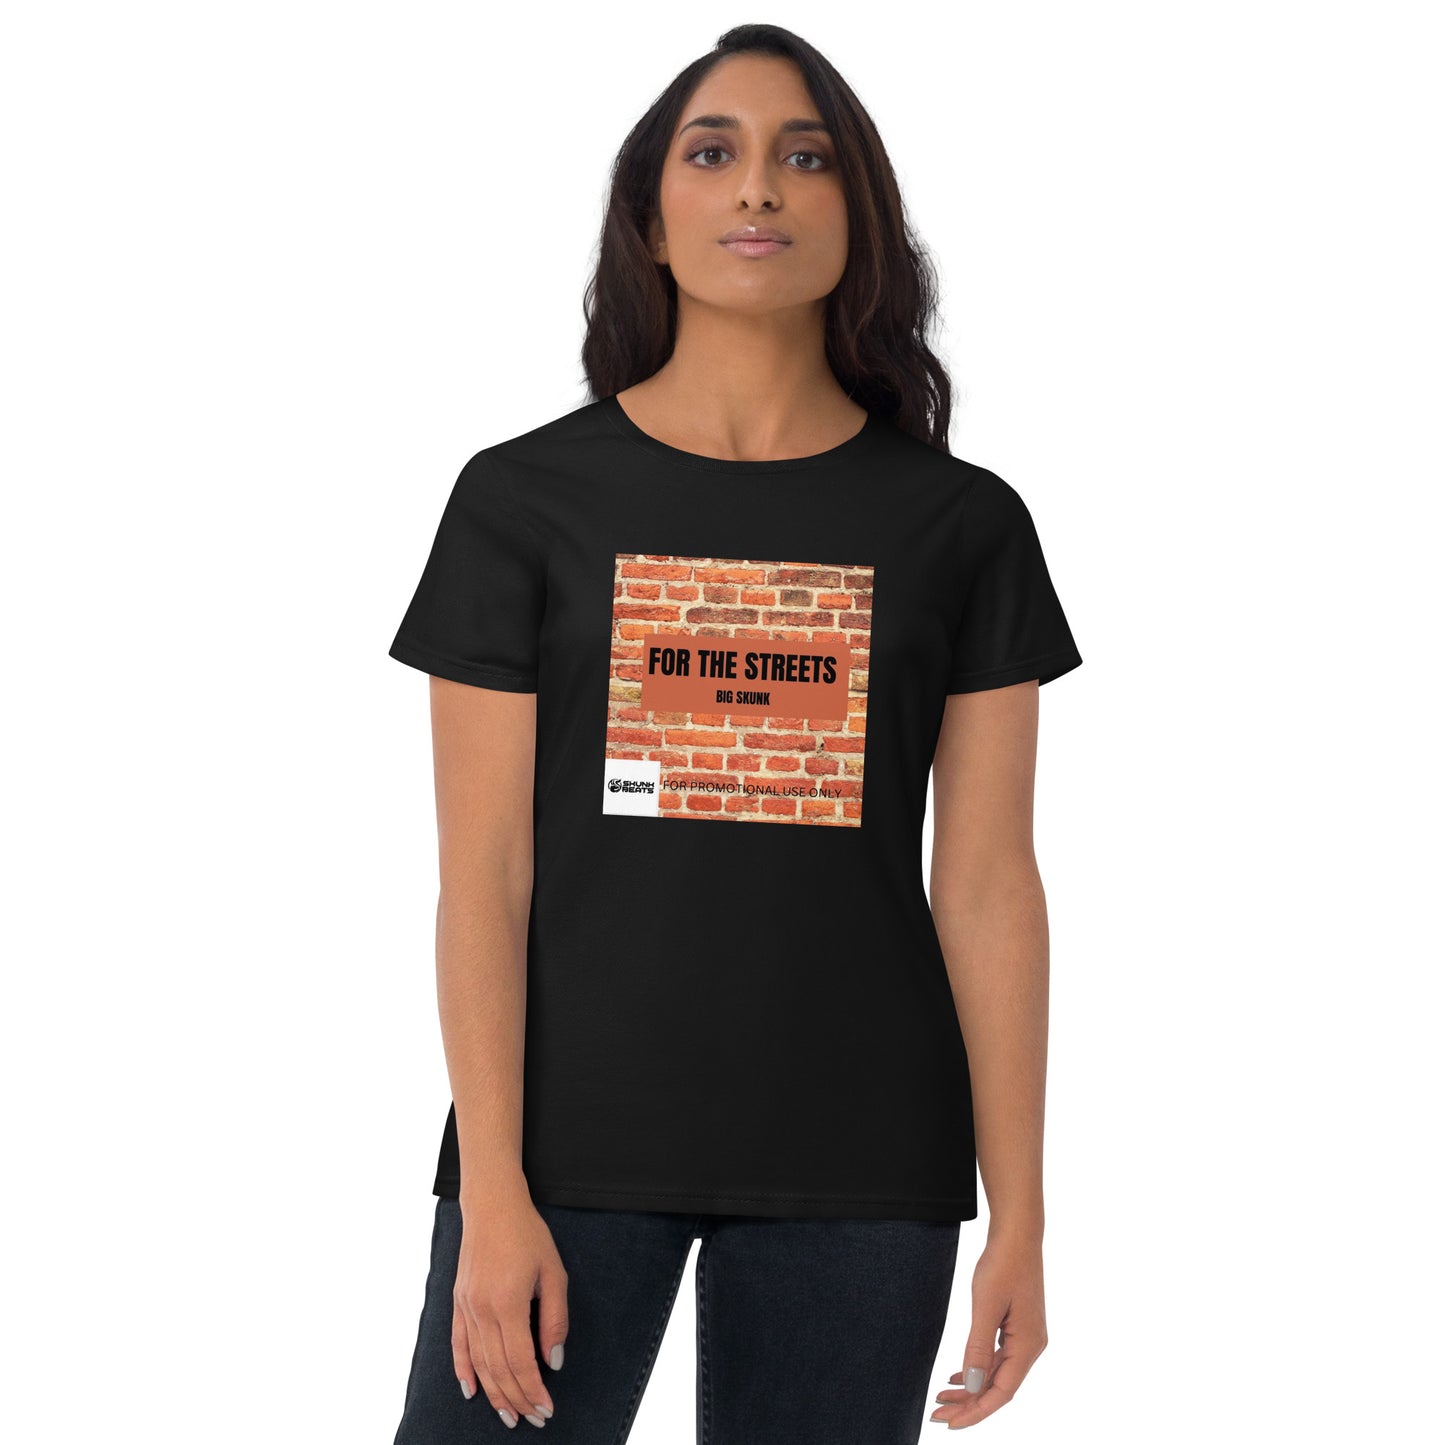 FOR THE STREETS Women's short sleeve t-shirt